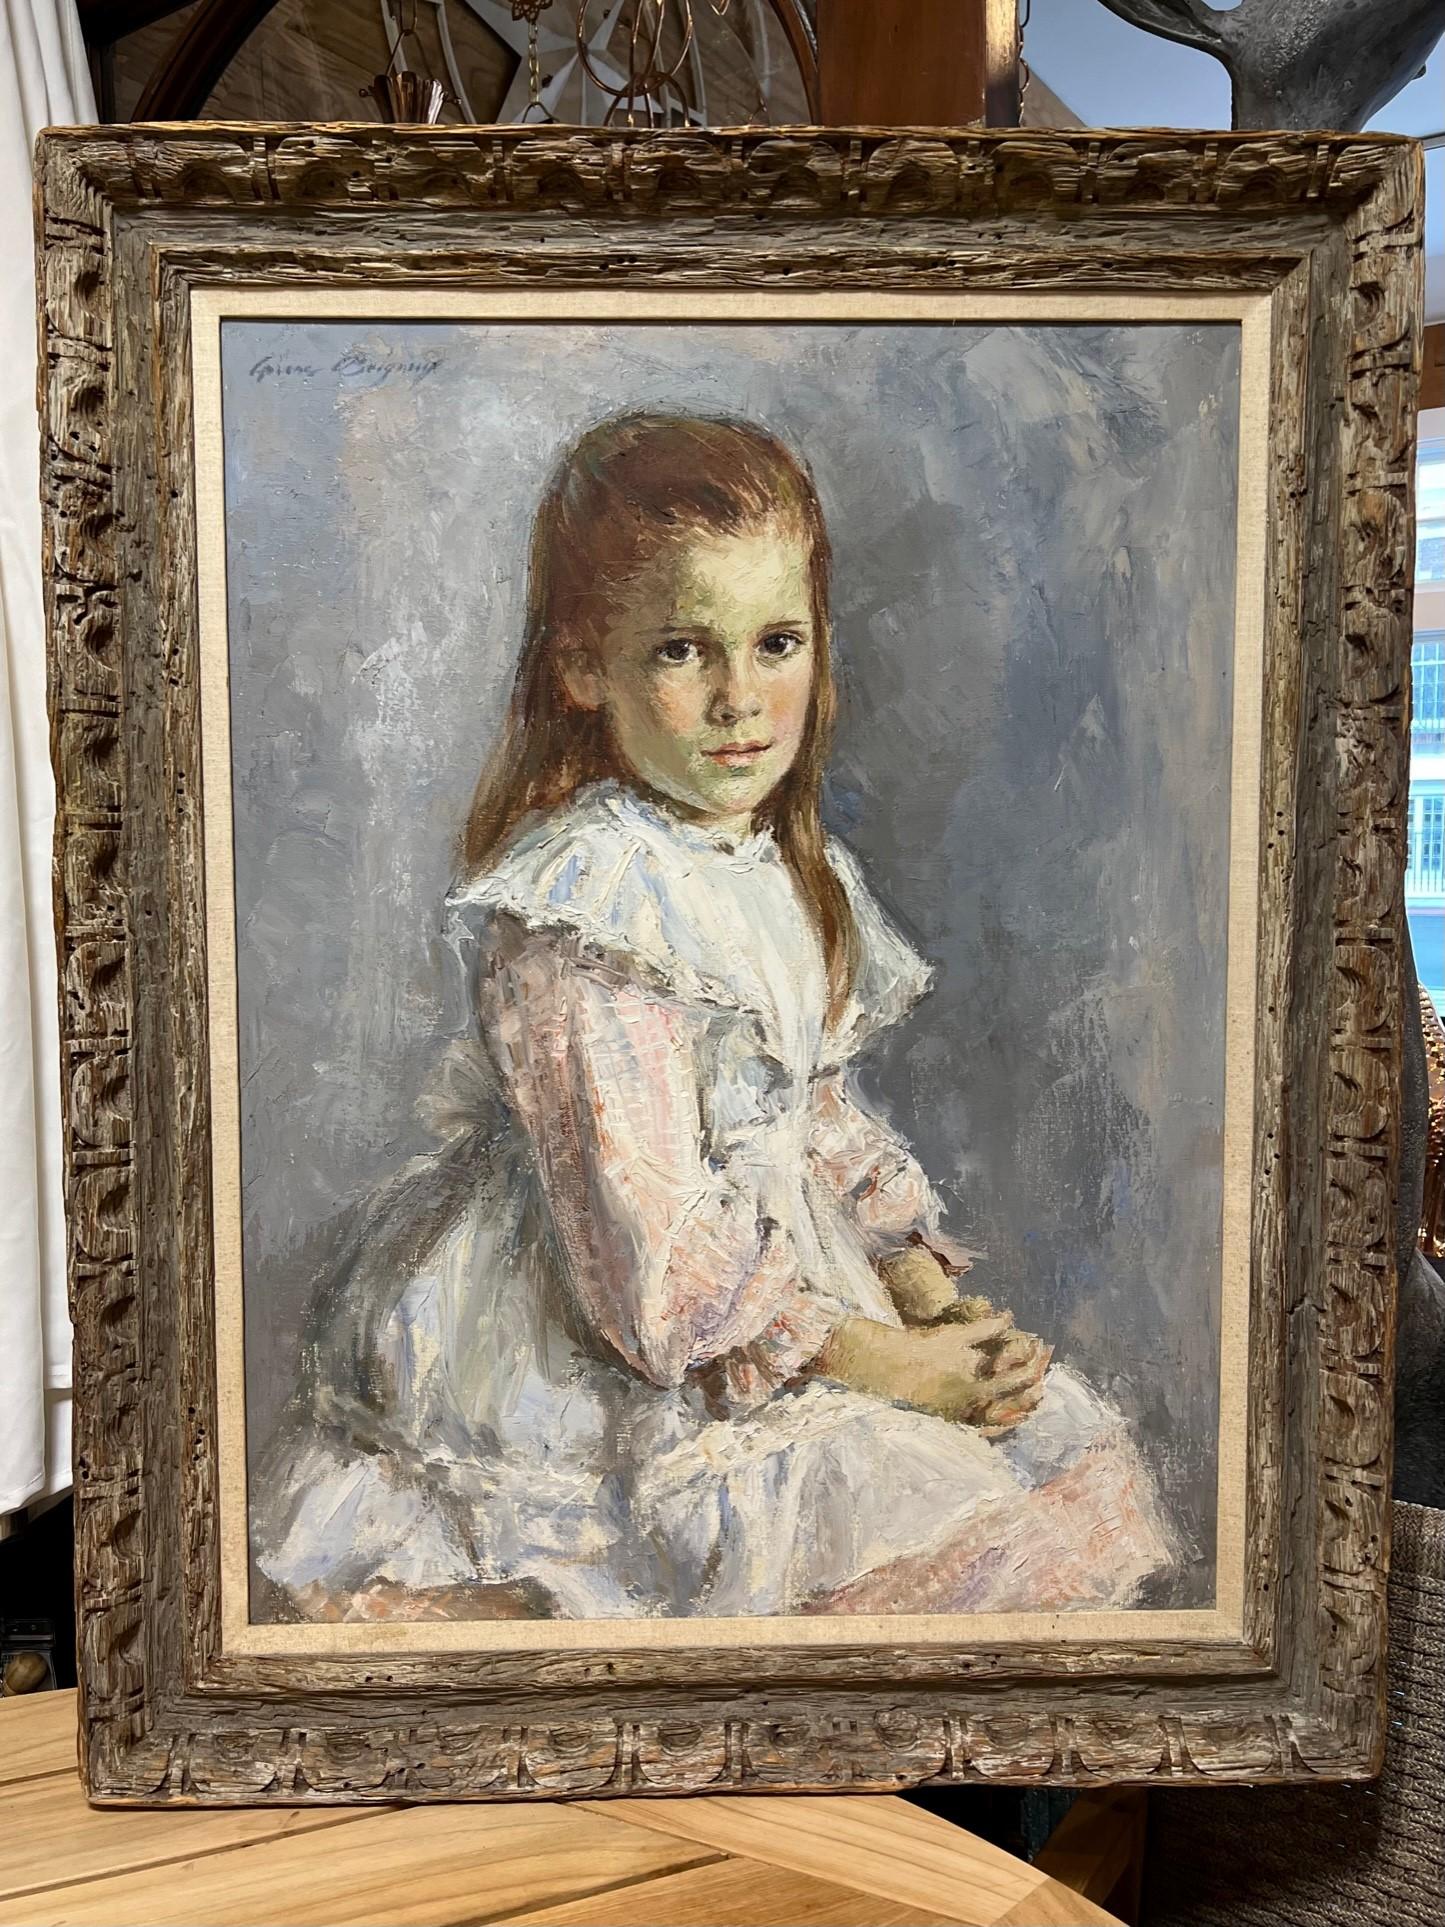 Ariane Beigneux American artist who was known for her portrait paintings of young children. This painting exemplifies the type of traditional portraits that were her specialty. Ariane Beigneux's portraits of children are owned and cherished by